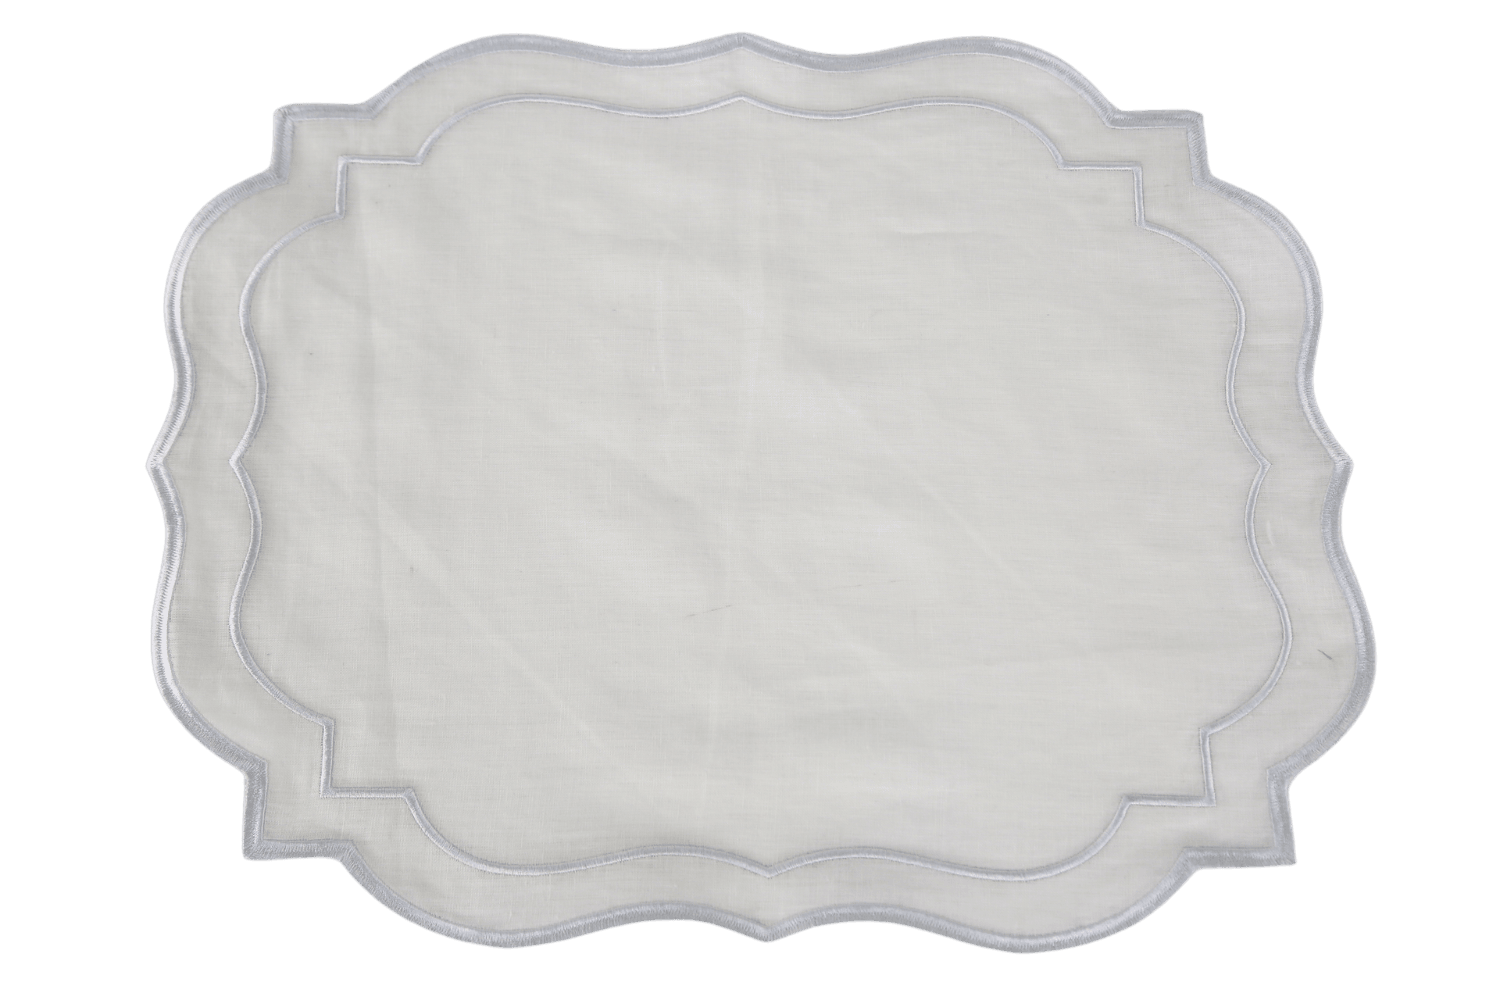 Scalloped linen placemats, set of 4, perfect for elegant table setups. Made of premium flax linen, ironing suggested. 38 x 38cm.